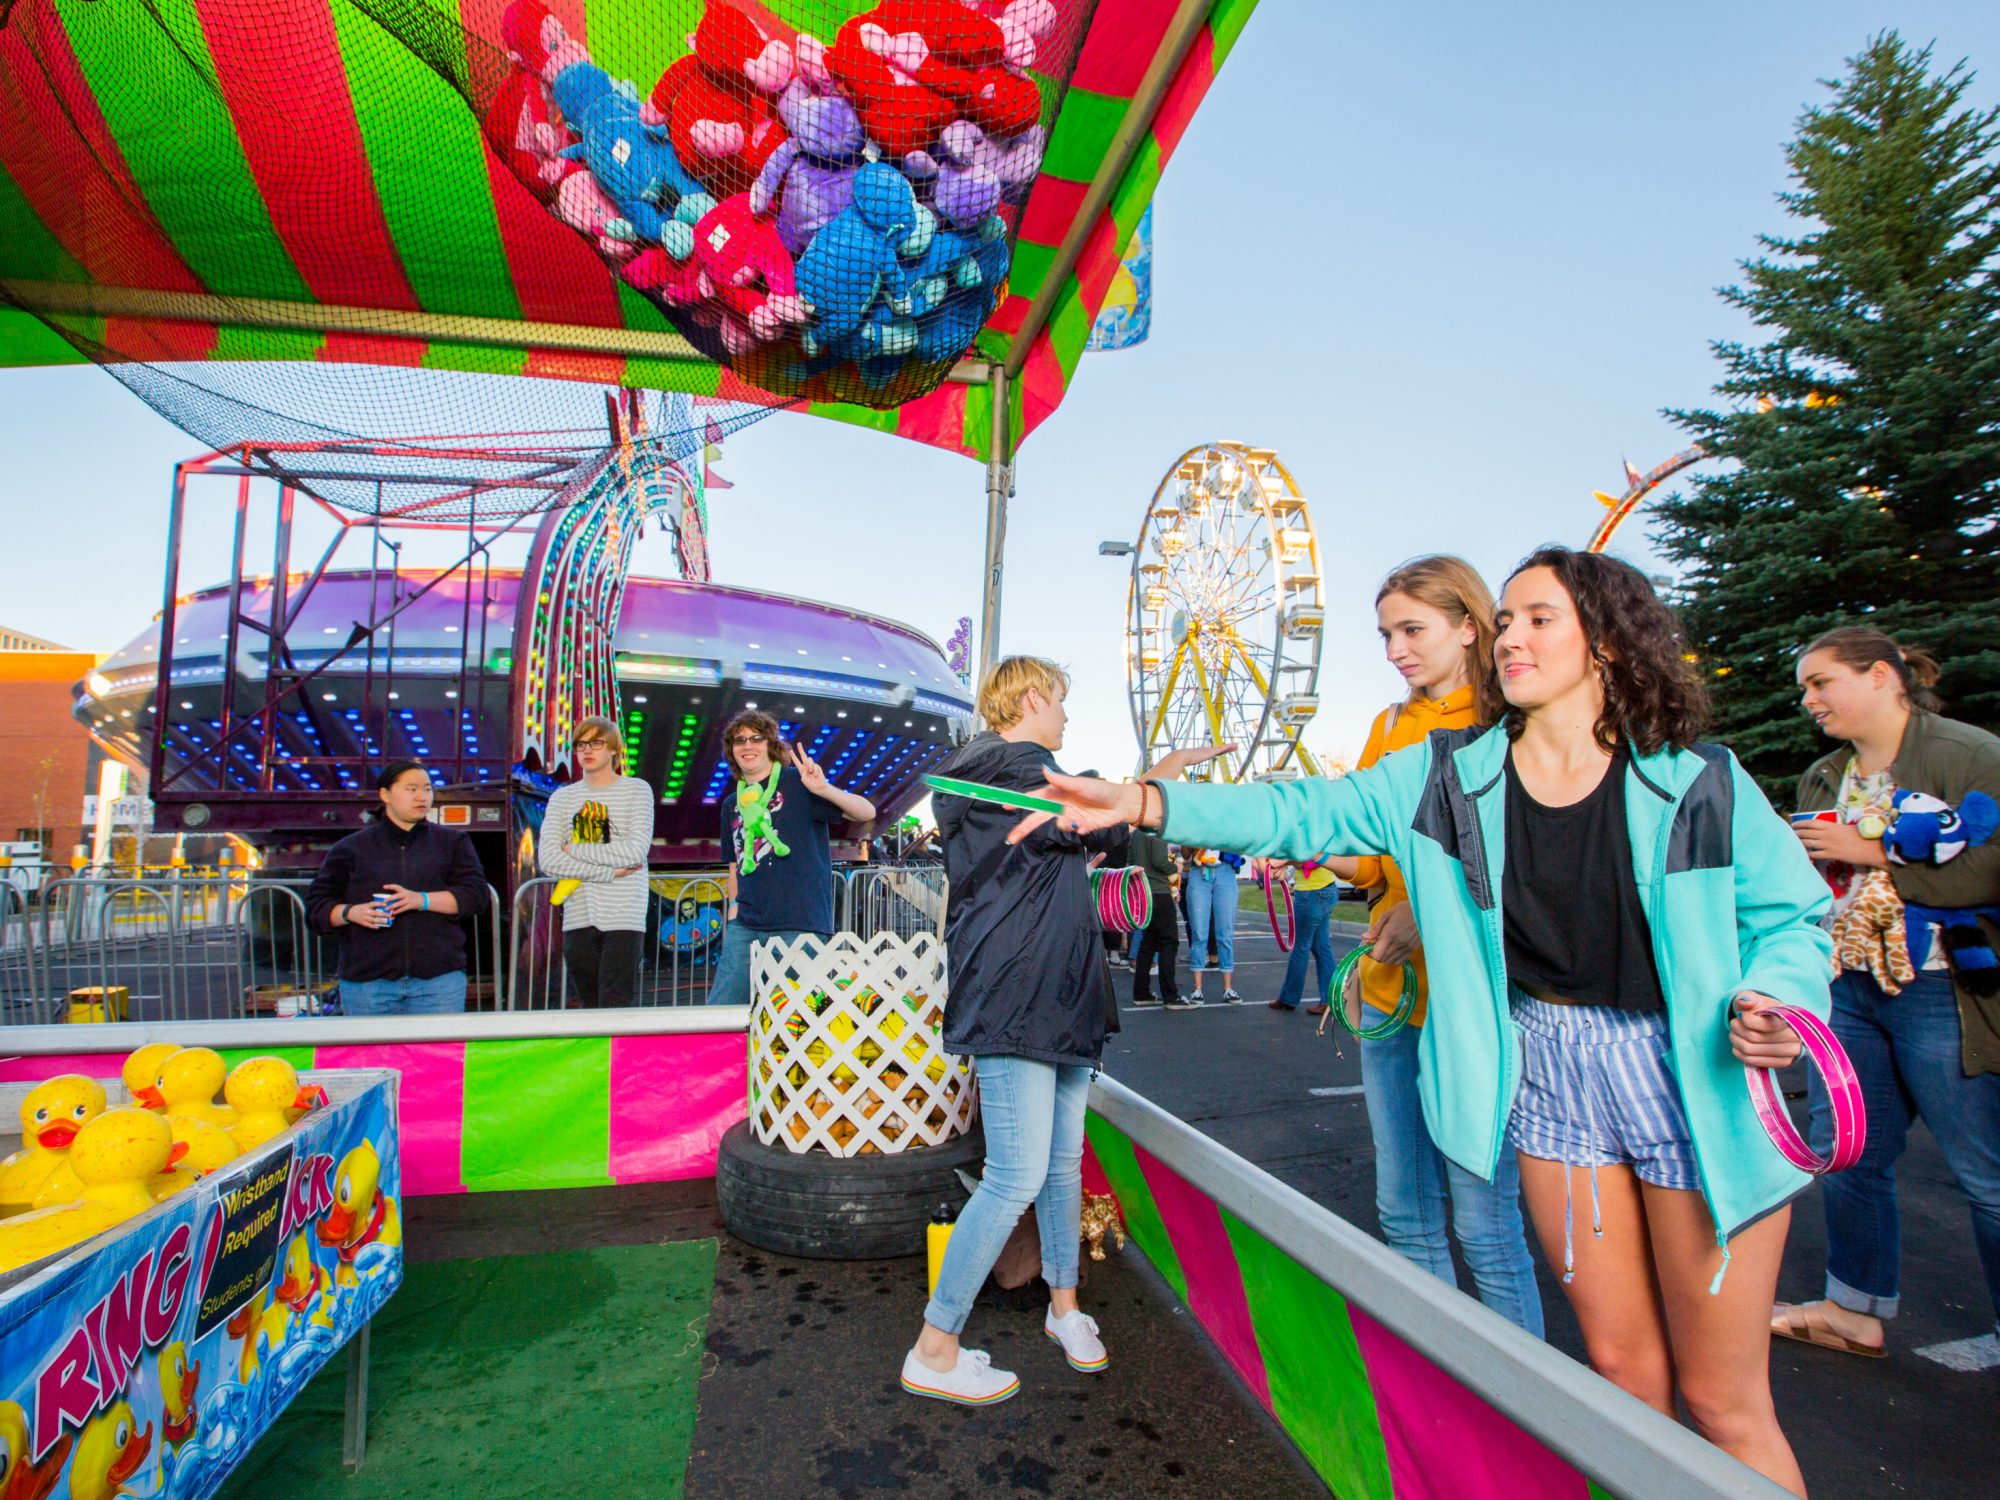 N A U students throwing rings in a carnival booth with a student holding a peace sign in the background.